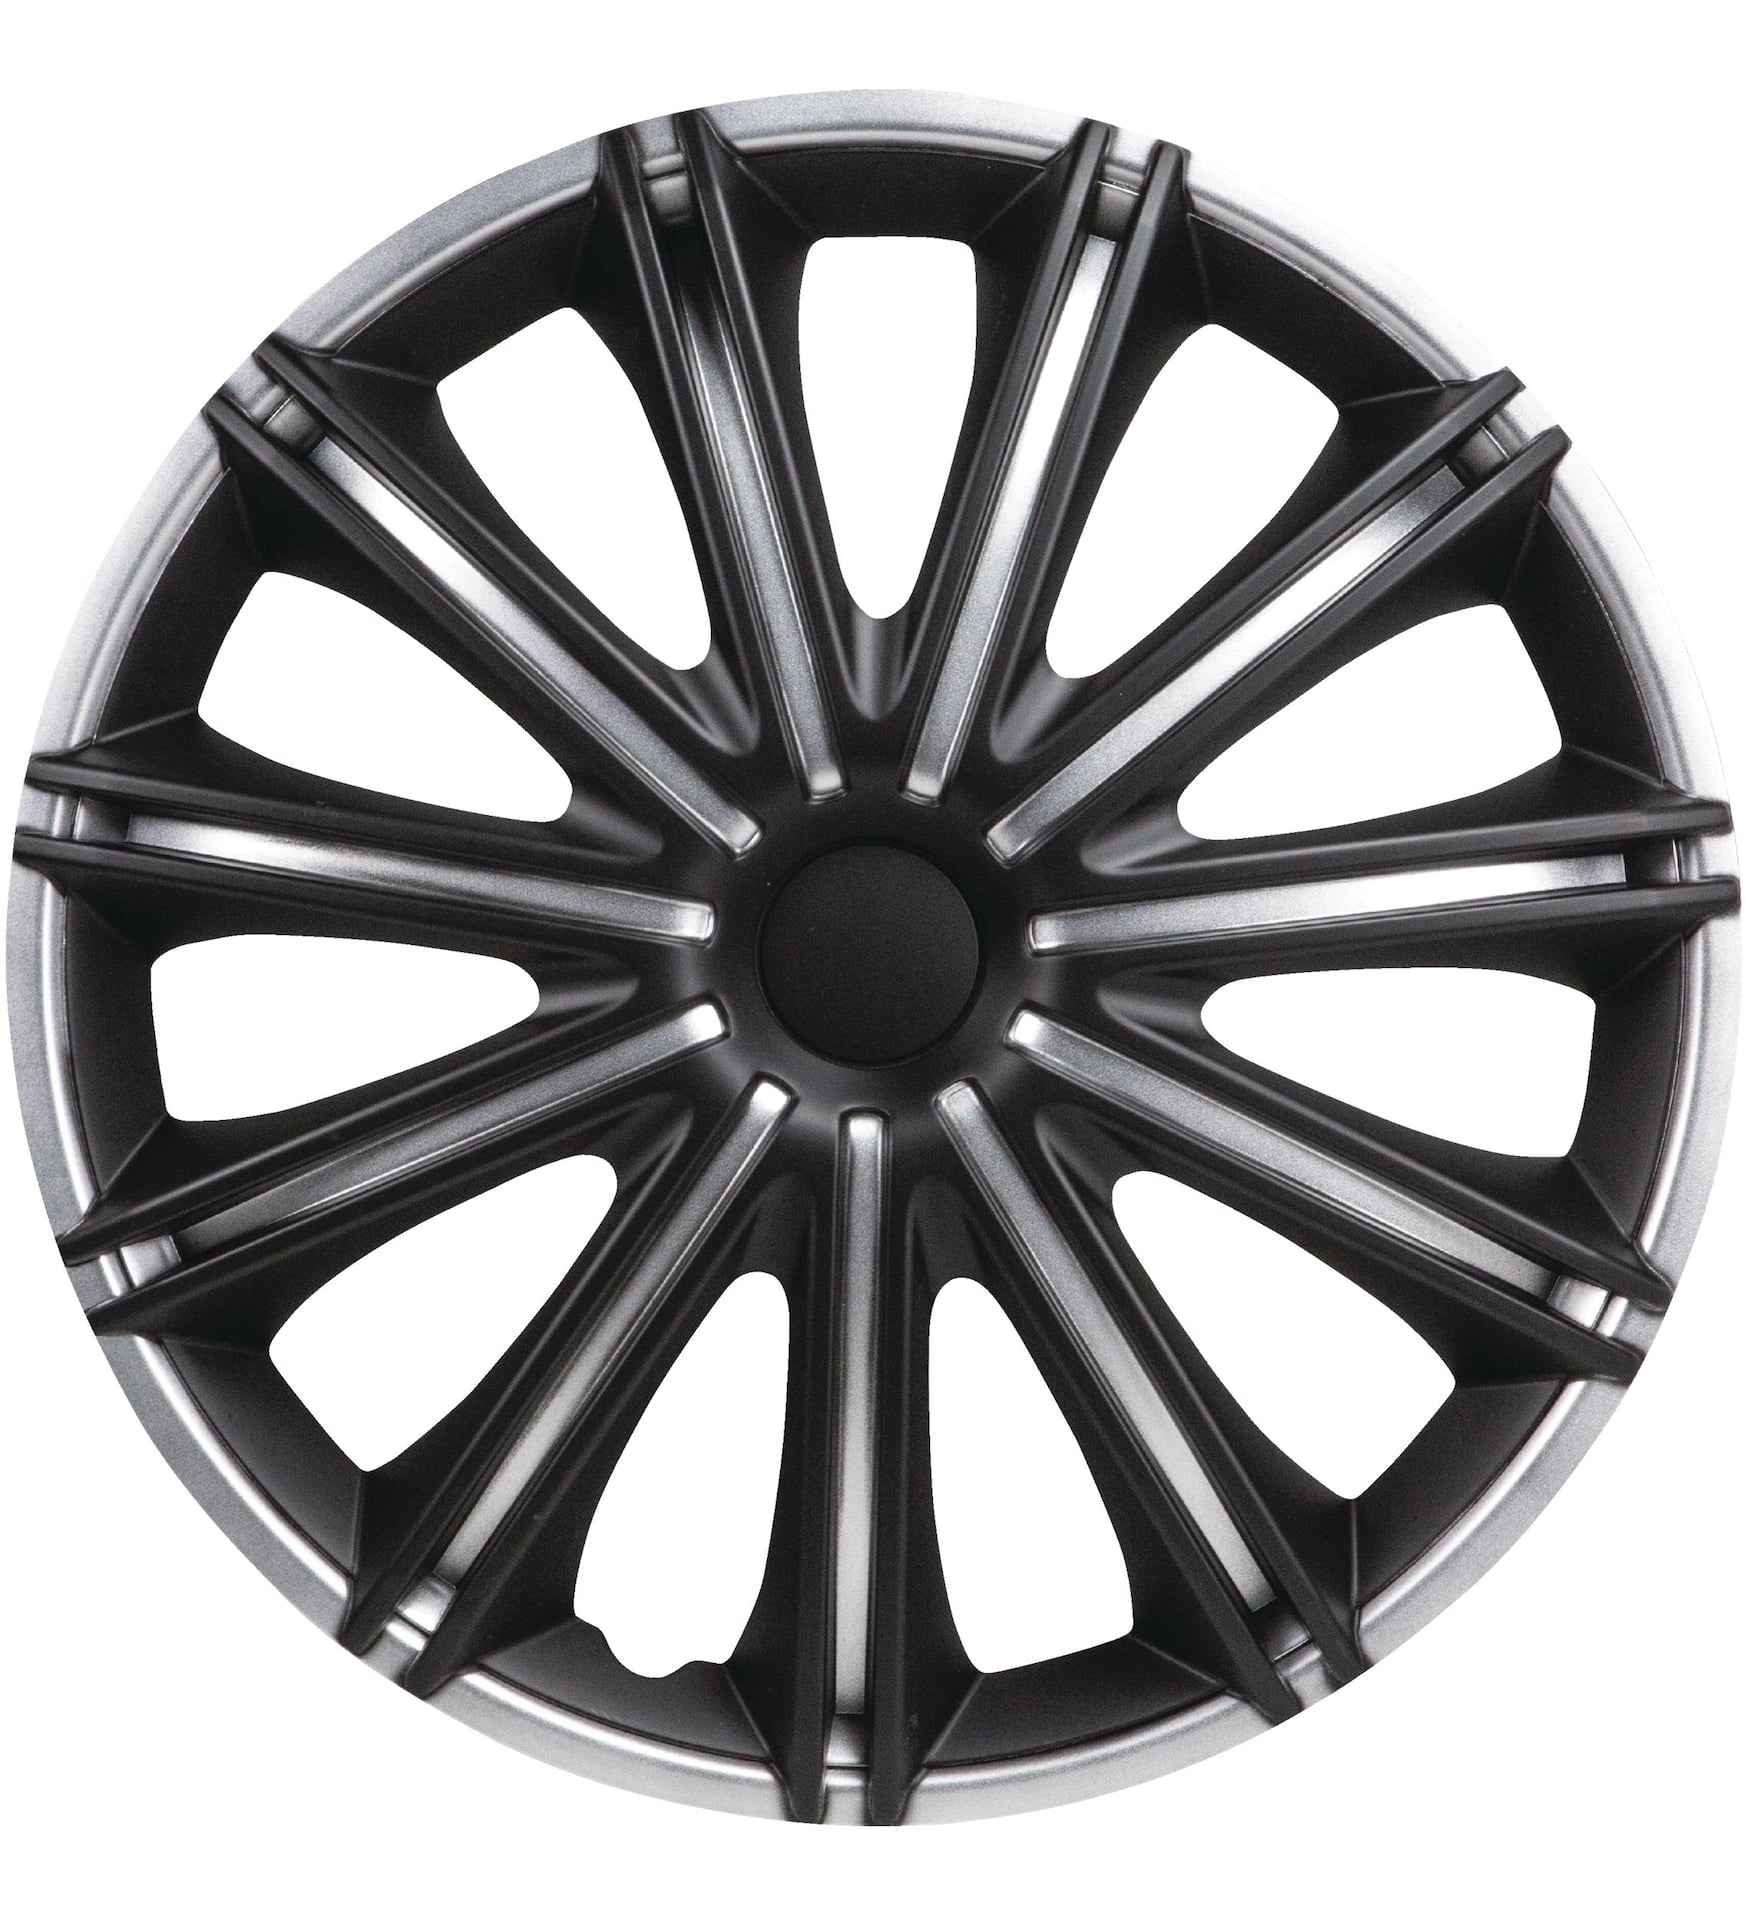 https://media-www.canadiantire.ca/product/automotive/tires/wheels-and-accessories/2410928/drivestyle-nero-silver-black-17-wheel-cover-a56d6f16-c14a-4ade-a4c4-d143618328c5-jpgrendition.jpg